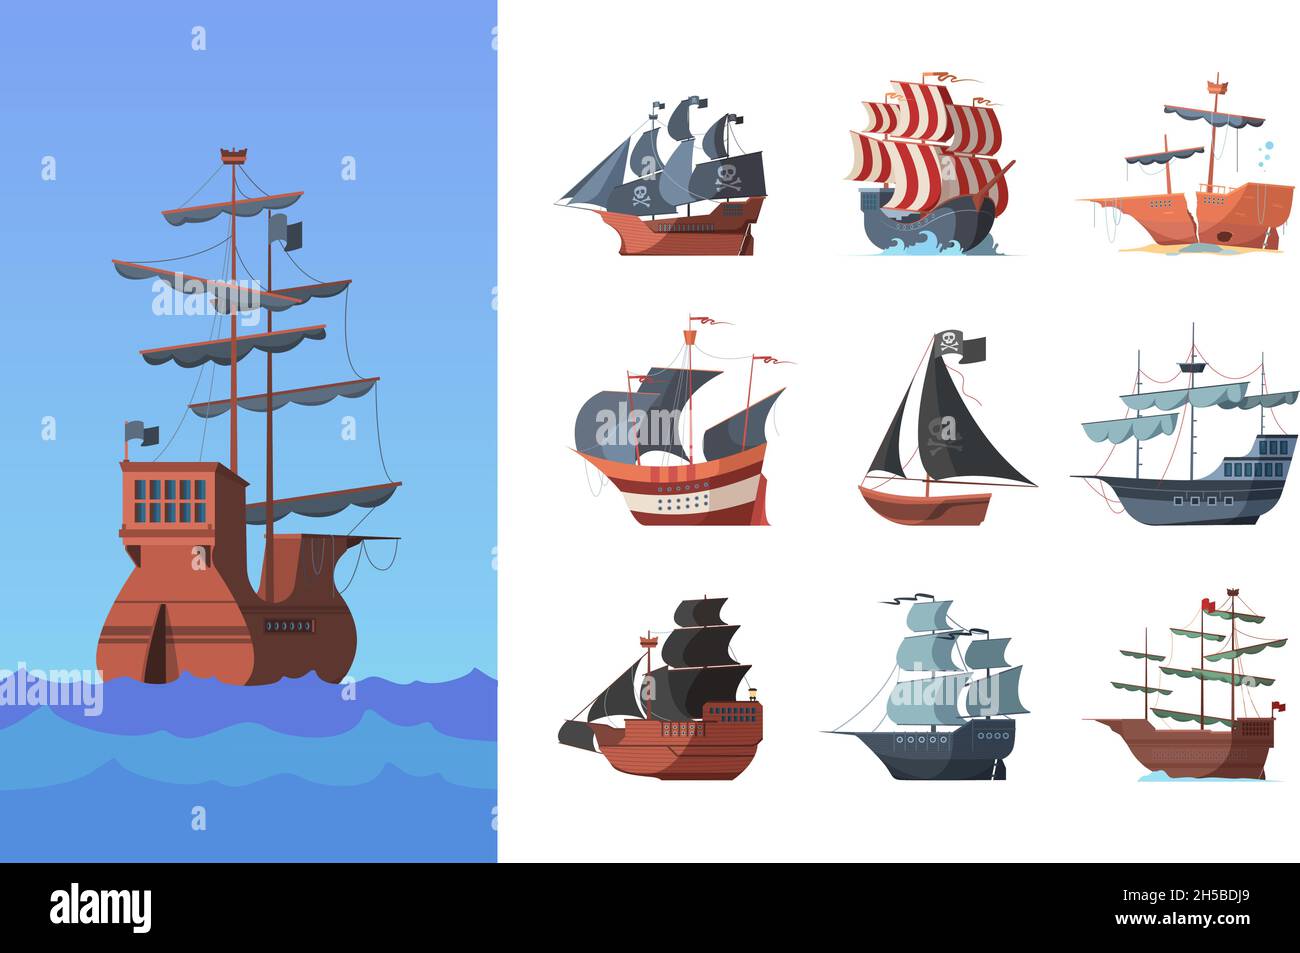 Pirate boats. Old shipping sails traditional vessel pirate symbols garish vector illustrations collection set Stock Vector